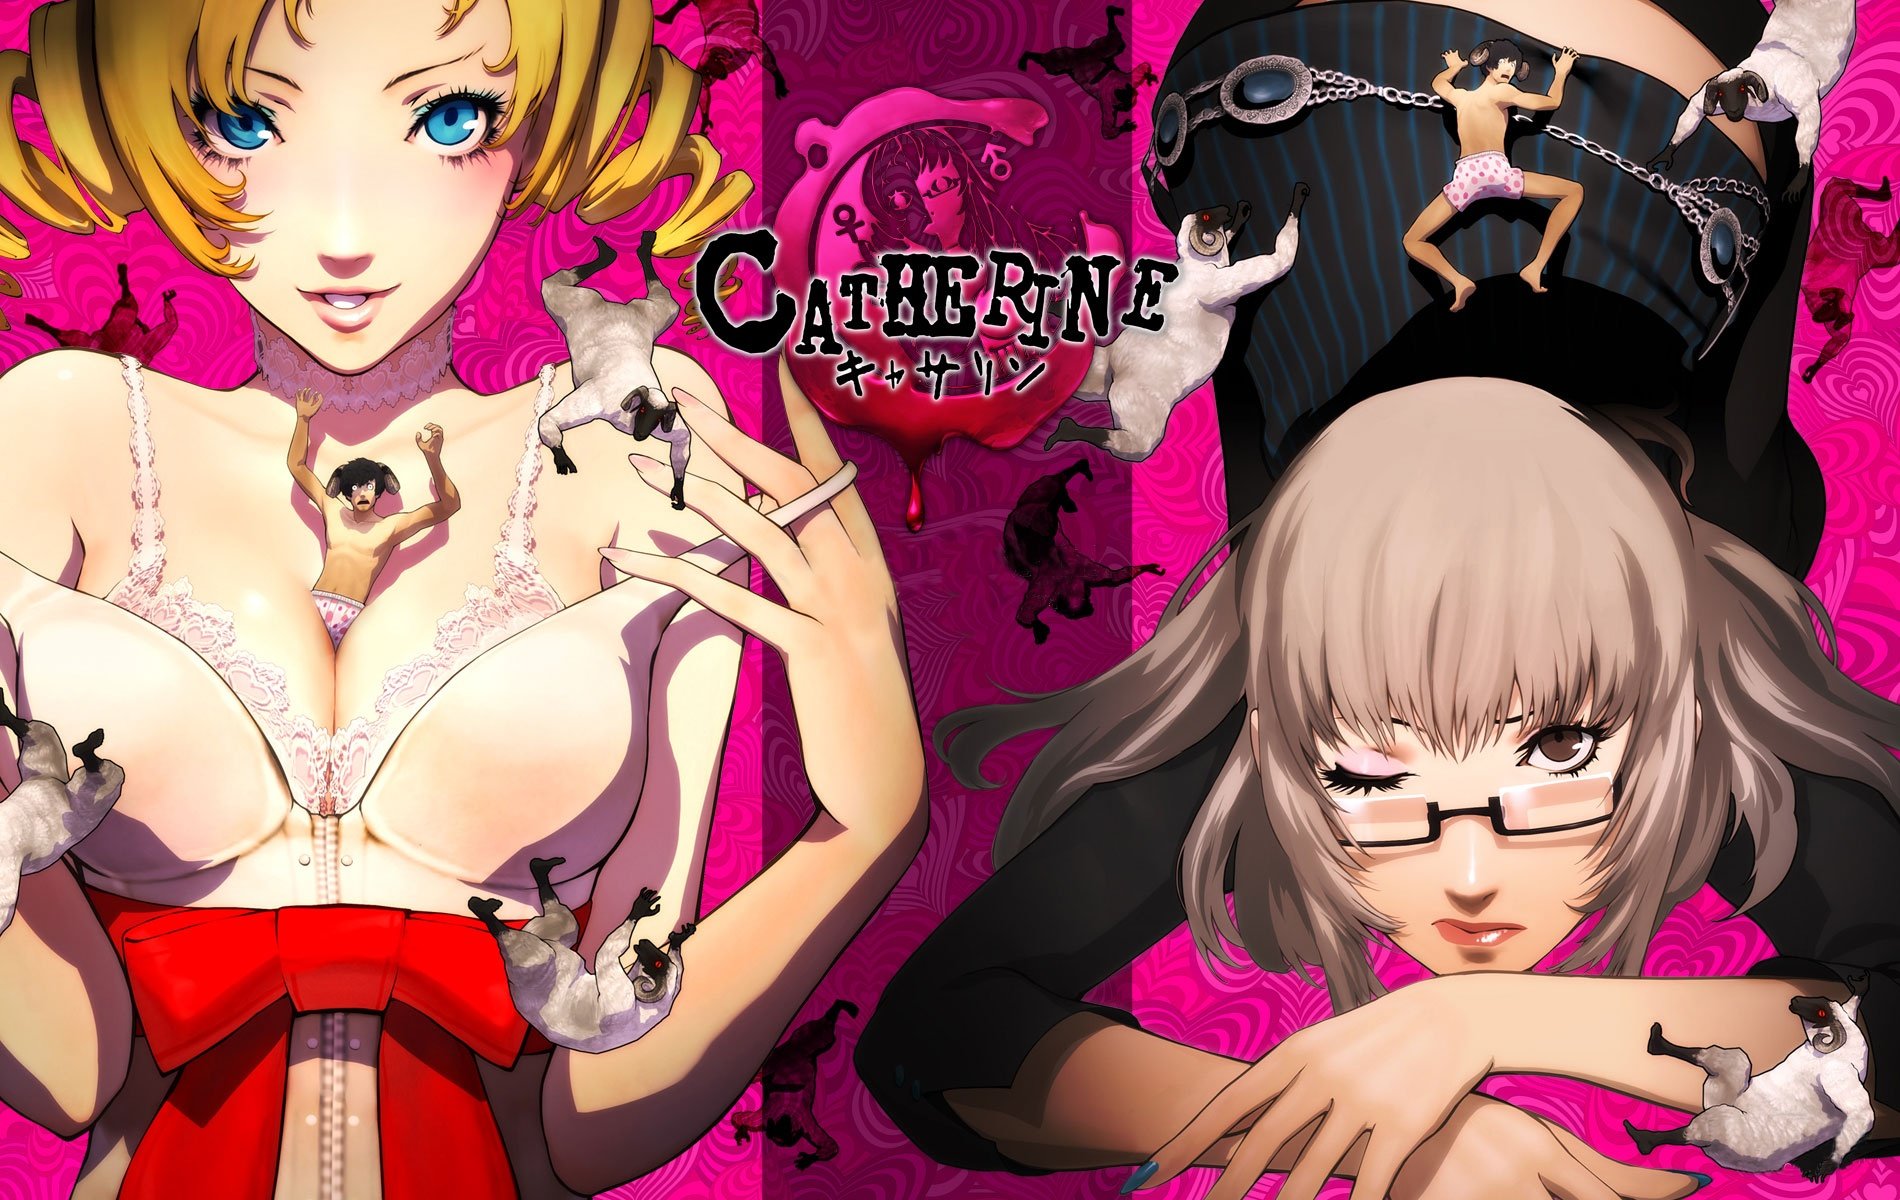 Now, grab a snack and enjoy the strange review of "Catherine". 